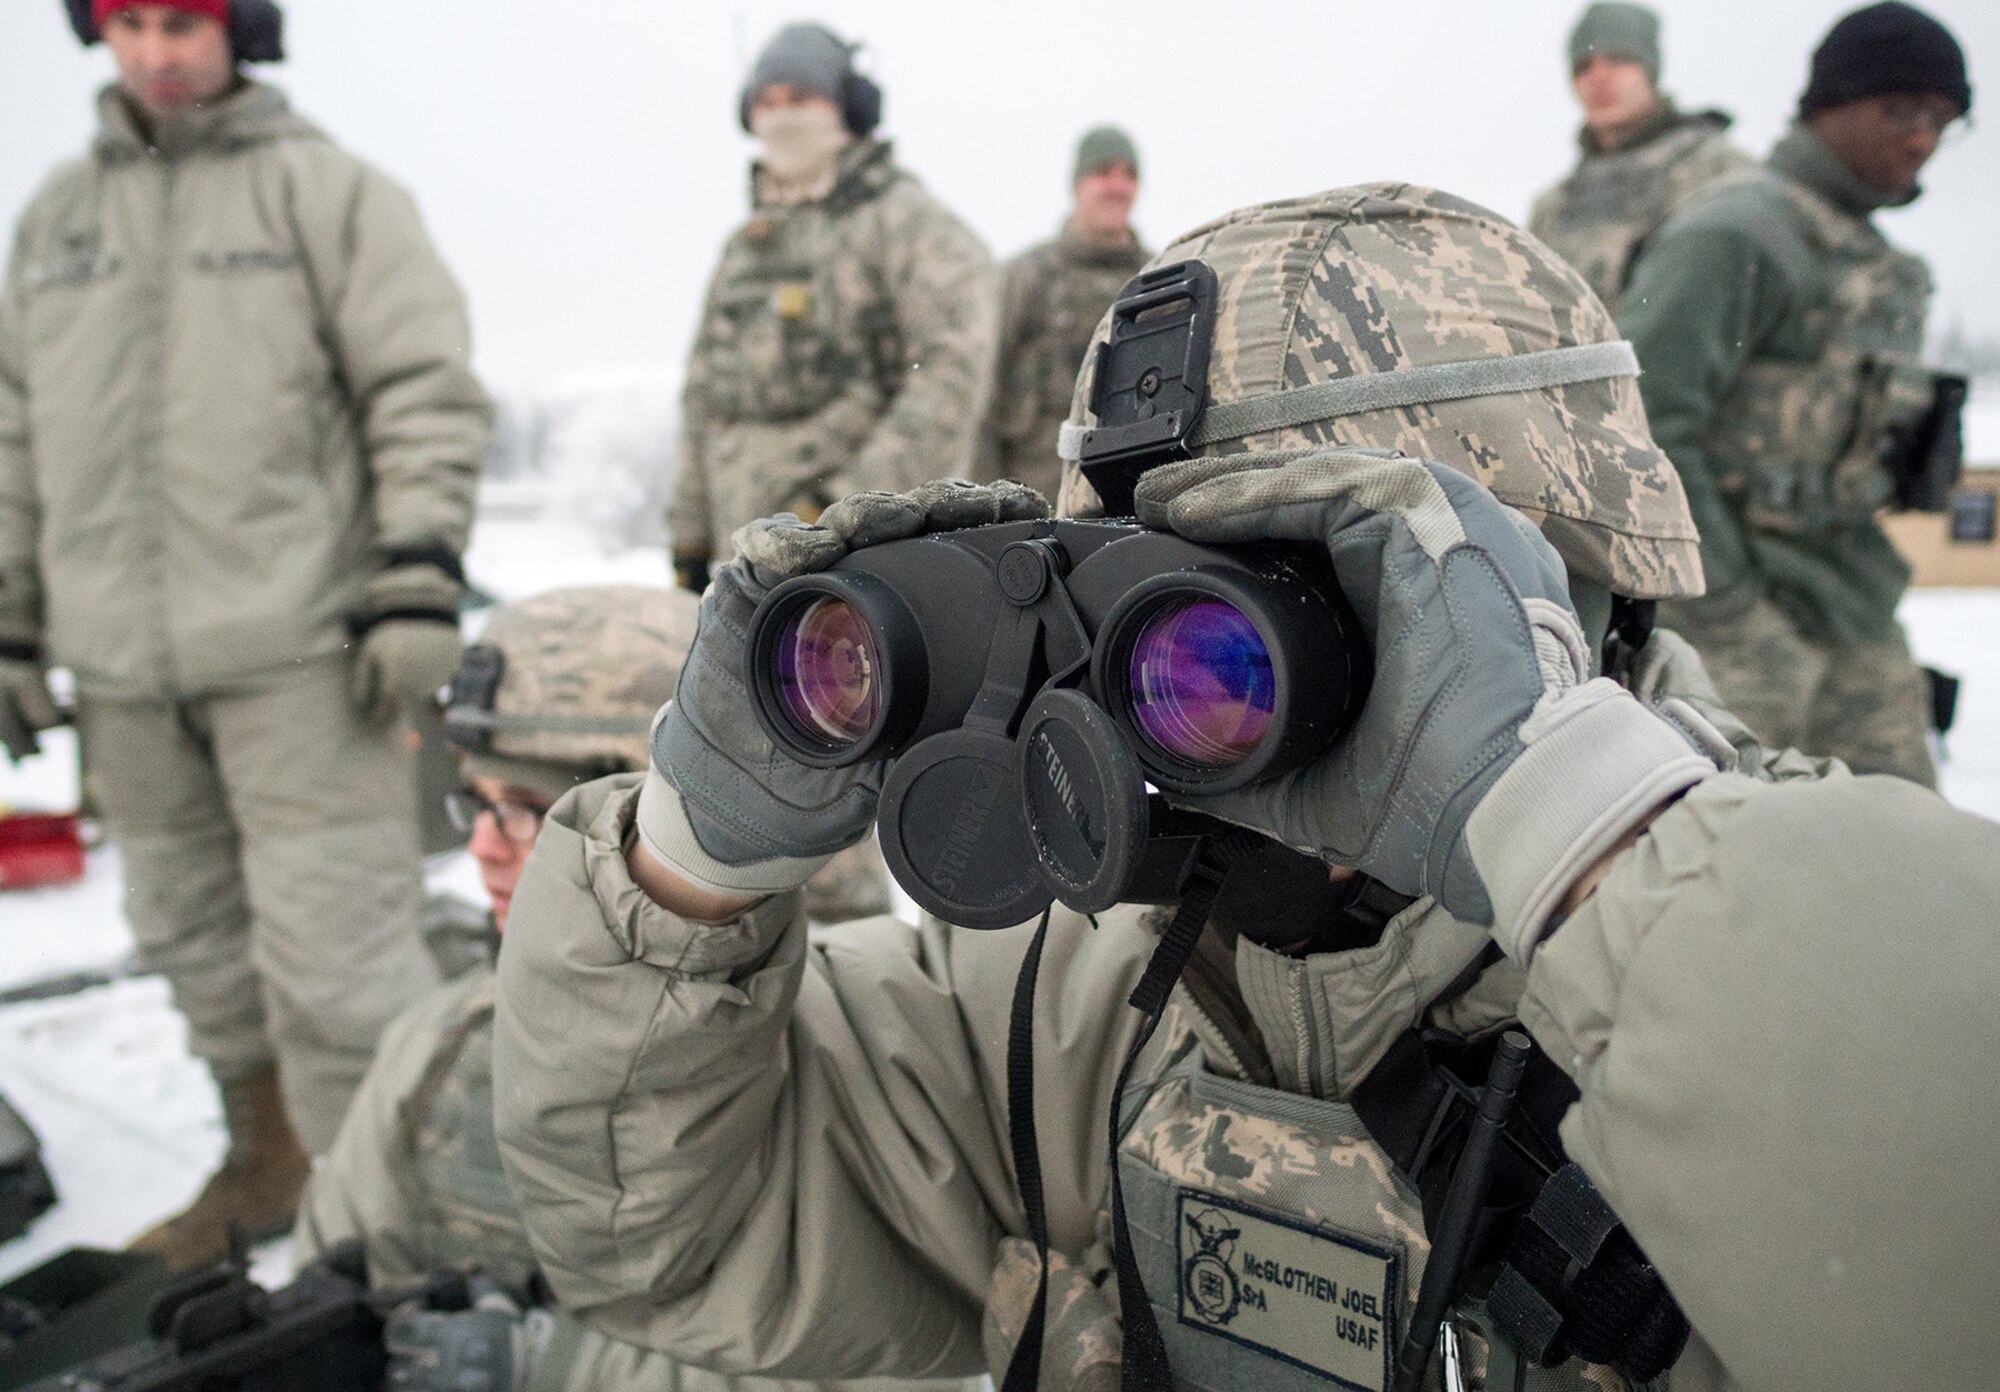 Senior Airman Joel McGlothen, a native of Battle Creek, Mich., uses binoculars to spot targets for Airmen assigned to the 673d Security Forces Squadron conducting an M249 Squad Automatic Weapon, and M2 .50 Caliber machine gun qualification range on Joint Base Elmendorf-Richardson, Alaska, Jan. 10, 2018. Security Forces Airmen perform extensive training in law enforcement as well as combat tactics to protect U.S. Military bases and assets both stateside and overseas.